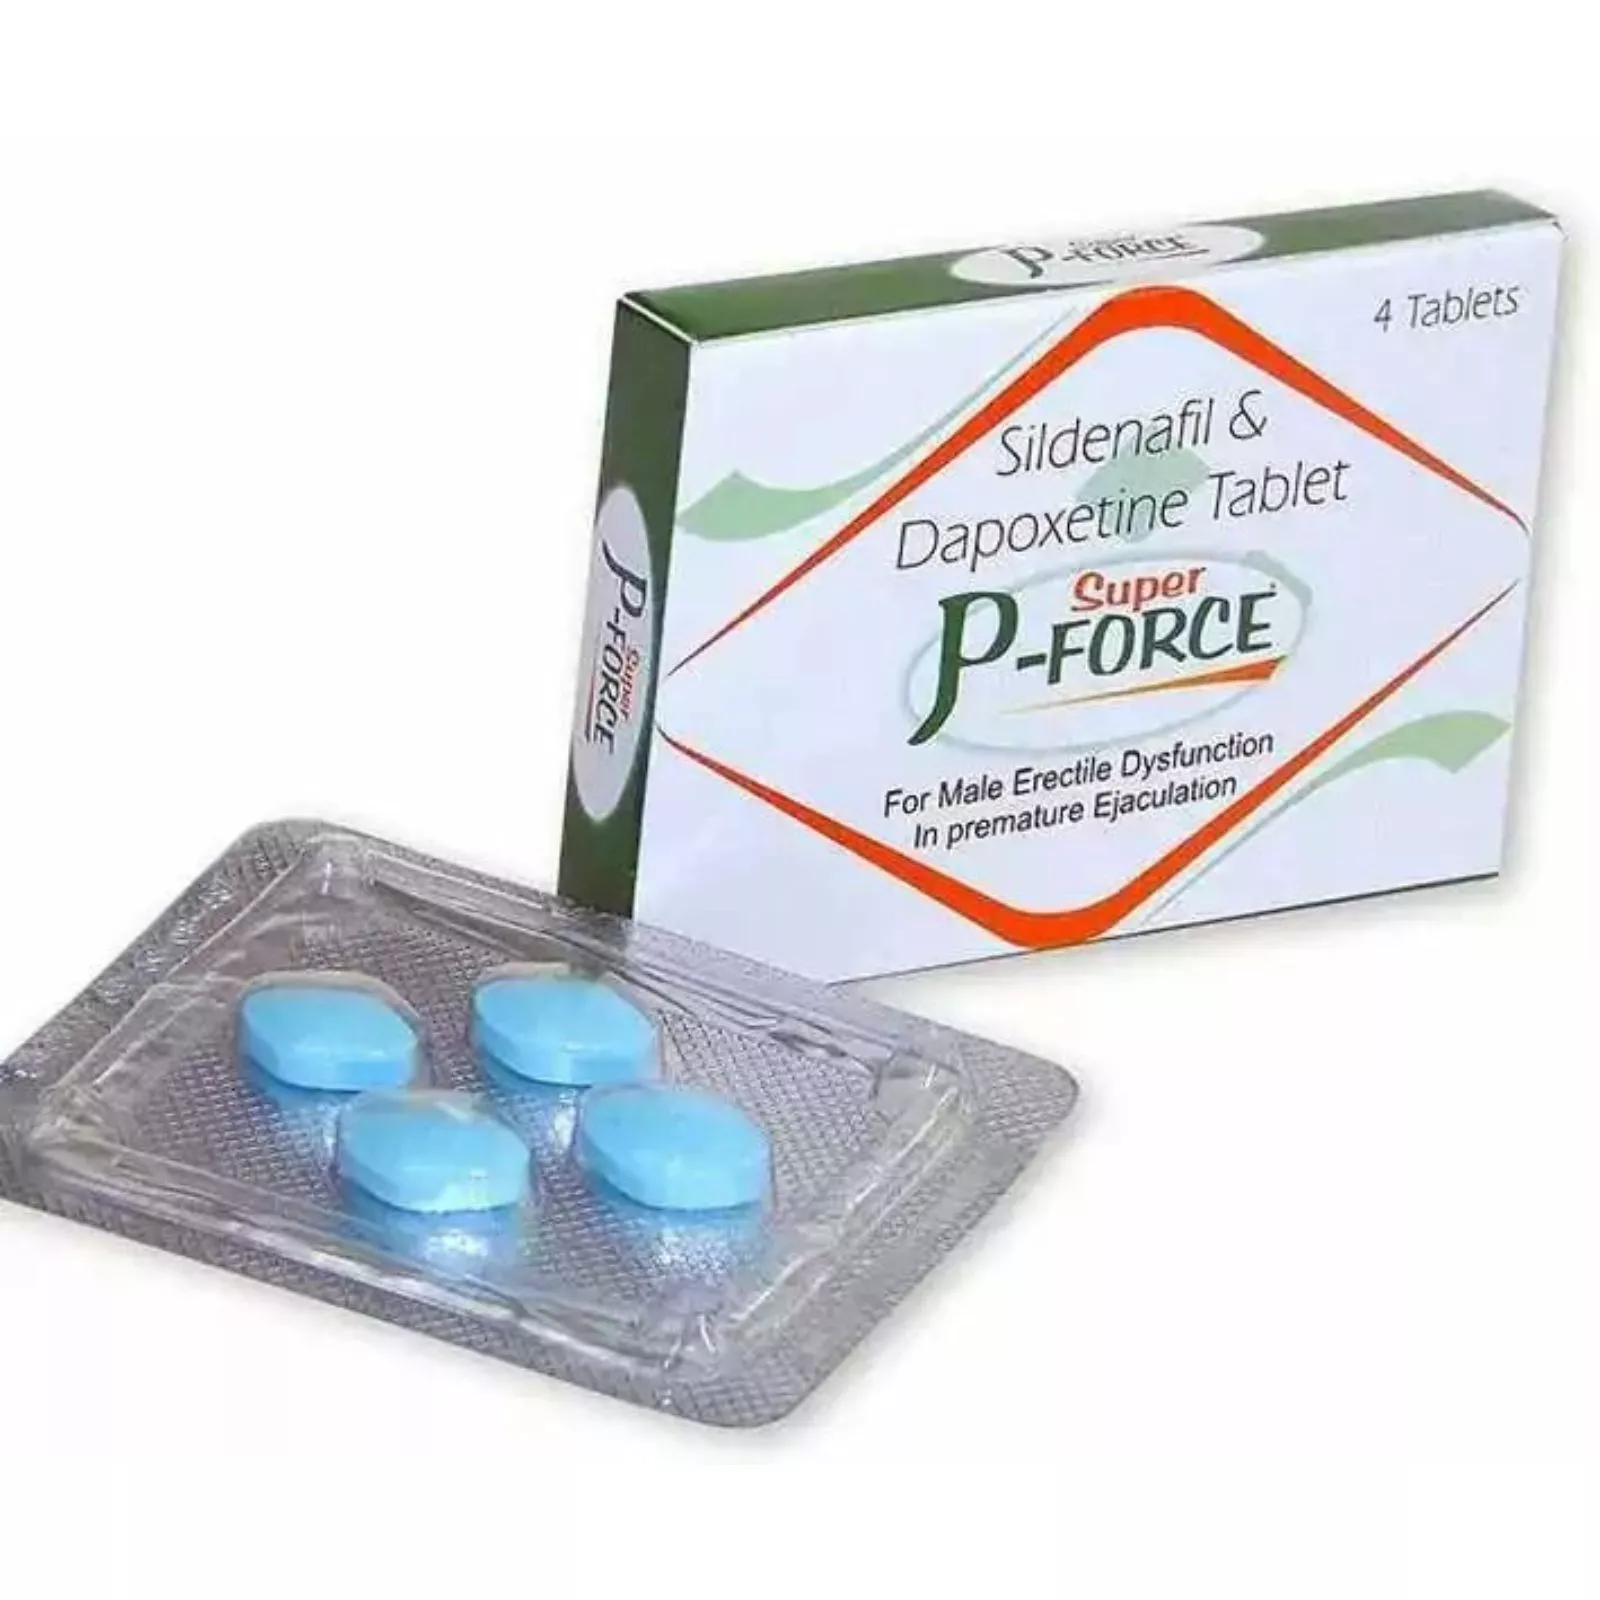 Original combination of Sildenafil &amp; Dapoxetine for treatment of Erectile Dysfunction &amp; Premature Ejaculation in one tablet